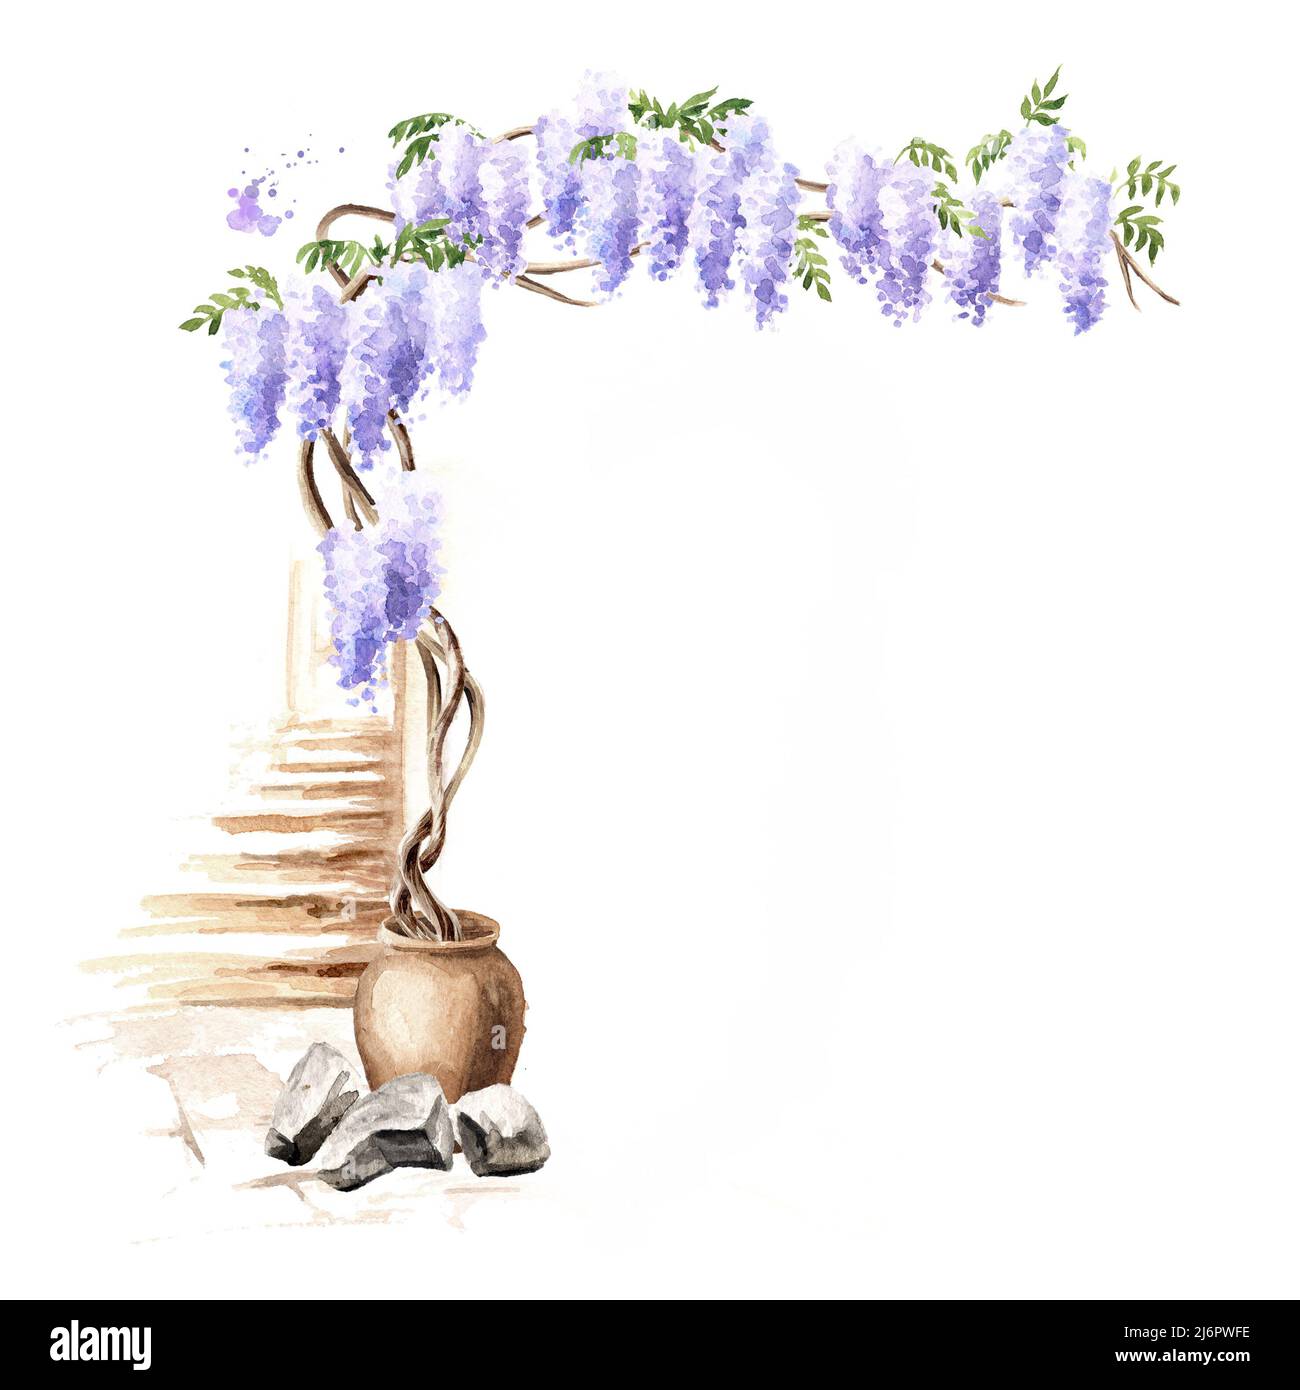 Old architecture and Wisteria  blossom tree. Hand  drawn watercolor  illustration isolated on white background Stock Photo